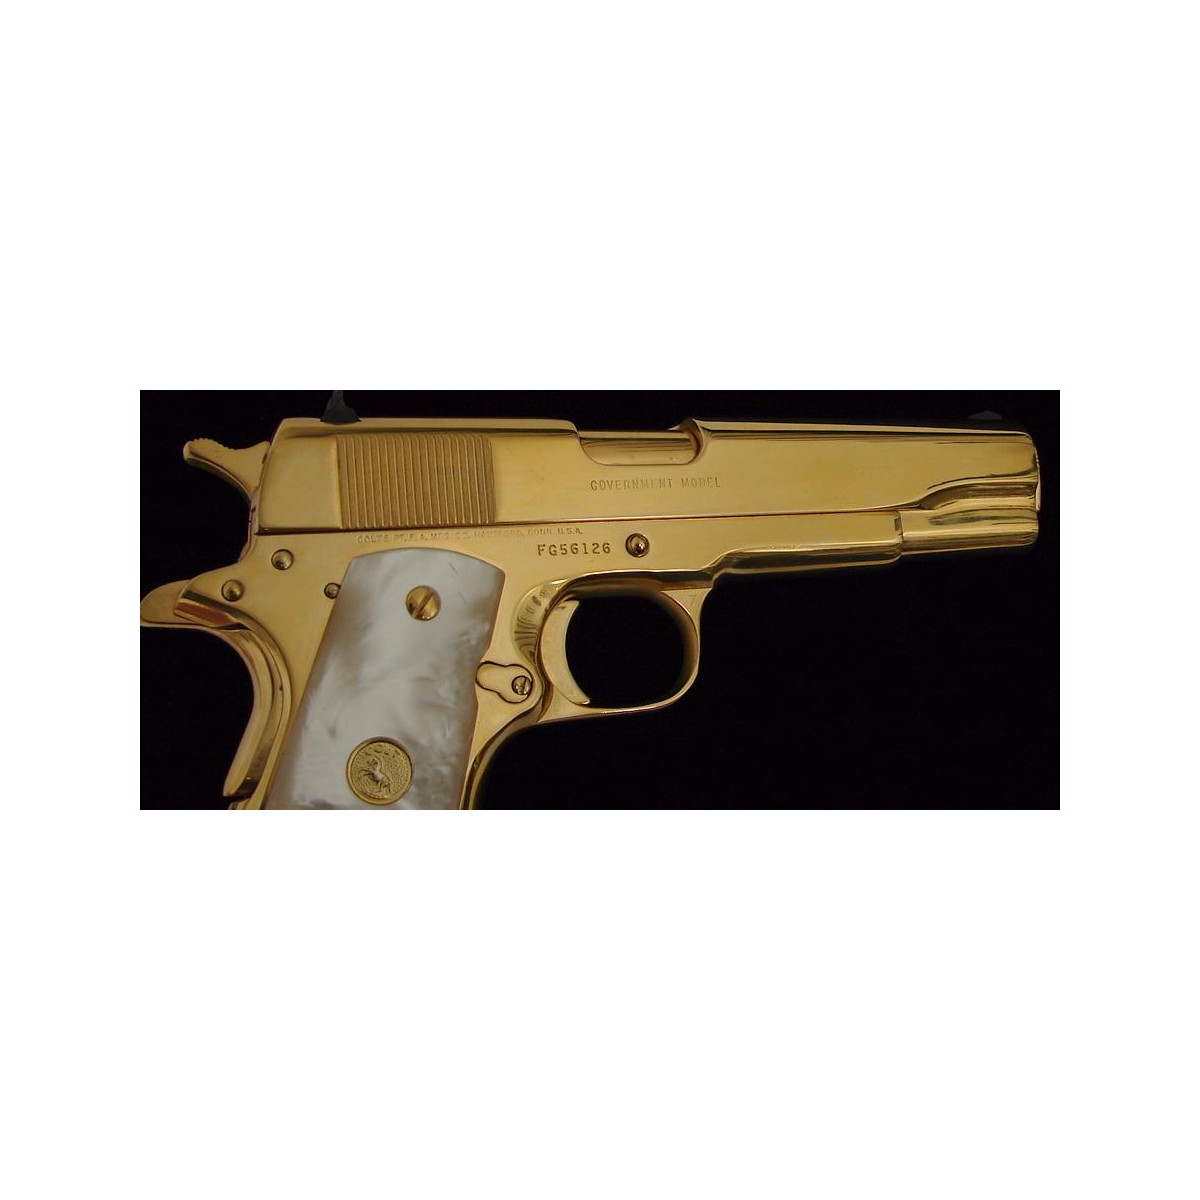 Colt Government Model 45 Acp Caliber Pistol Custom Gold Plated Model Marked El Presidente With 7436